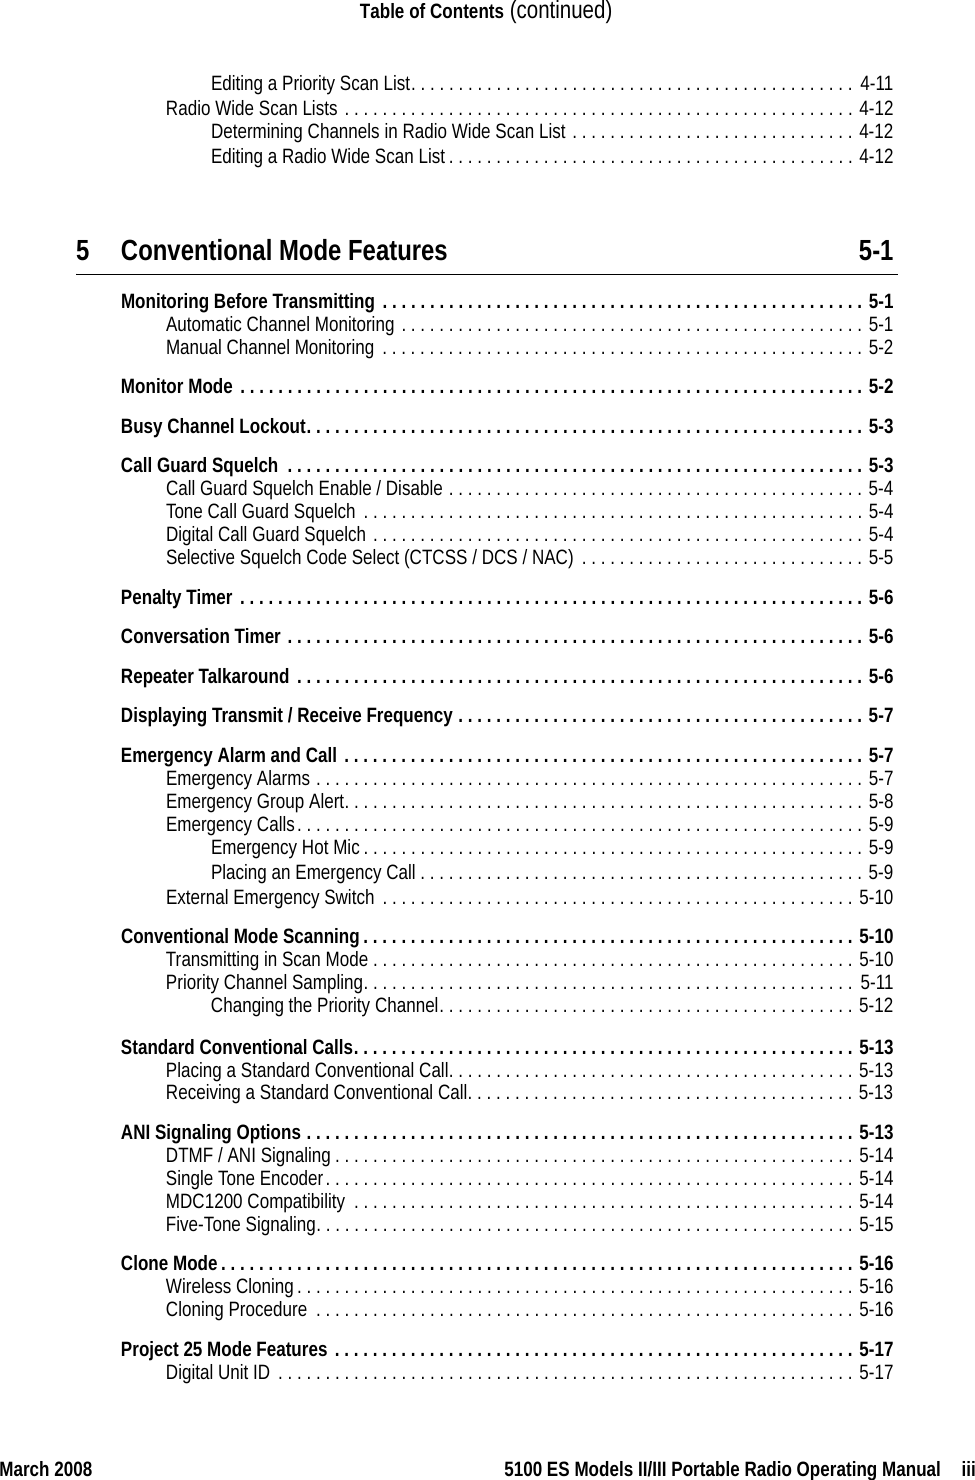 March 2008 5100 ES Models II/III Portable Radio Operating Manual  iiiTable of Contents (continued)Editing a Priority Scan List. . . . . . . . . . . . . . . . . . . . . . . . . . . . . . . . . . . . . . . . . . . . . . . 4-11Radio Wide Scan Lists . . . . . . . . . . . . . . . . . . . . . . . . . . . . . . . . . . . . . . . . . . . . . . . . . . . . . . 4-12Determining Channels in Radio Wide Scan List . . . . . . . . . . . . . . . . . . . . . . . . . . . . . . 4-12Editing a Radio Wide Scan List. . . . . . . . . . . . . . . . . . . . . . . . . . . . . . . . . . . . . . . . . . . 4-125 Conventional Mode Features 5-1Monitoring Before Transmitting . . . . . . . . . . . . . . . . . . . . . . . . . . . . . . . . . . . . . . . . . . . . . . . . . . . 5-1Automatic Channel Monitoring . . . . . . . . . . . . . . . . . . . . . . . . . . . . . . . . . . . . . . . . . . . . . . . . . 5-1Manual Channel Monitoring . . . . . . . . . . . . . . . . . . . . . . . . . . . . . . . . . . . . . . . . . . . . . . . . . . . 5-2Monitor Mode . . . . . . . . . . . . . . . . . . . . . . . . . . . . . . . . . . . . . . . . . . . . . . . . . . . . . . . . . . . . . . . . . . 5-2Busy Channel Lockout. . . . . . . . . . . . . . . . . . . . . . . . . . . . . . . . . . . . . . . . . . . . . . . . . . . . . . . . . . . 5-3Call Guard Squelch  . . . . . . . . . . . . . . . . . . . . . . . . . . . . . . . . . . . . . . . . . . . . . . . . . . . . . . . . . . . . . 5-3Call Guard Squelch Enable / Disable . . . . . . . . . . . . . . . . . . . . . . . . . . . . . . . . . . . . . . . . . . . . 5-4Tone Call Guard Squelch . . . . . . . . . . . . . . . . . . . . . . . . . . . . . . . . . . . . . . . . . . . . . . . . . . . . . 5-4Digital Call Guard Squelch . . . . . . . . . . . . . . . . . . . . . . . . . . . . . . . . . . . . . . . . . . . . . . . . . . . . 5-4Selective Squelch Code Select (CTCSS / DCS / NAC) . . . . . . . . . . . . . . . . . . . . . . . . . . . . . . 5-5Penalty Timer . . . . . . . . . . . . . . . . . . . . . . . . . . . . . . . . . . . . . . . . . . . . . . . . . . . . . . . . . . . . . . . . . . 5-6Conversation Timer . . . . . . . . . . . . . . . . . . . . . . . . . . . . . . . . . . . . . . . . . . . . . . . . . . . . . . . . . . . . . 5-6Repeater Talkaround . . . . . . . . . . . . . . . . . . . . . . . . . . . . . . . . . . . . . . . . . . . . . . . . . . . . . . . . . . . . 5-6Displaying Transmit / Receive Frequency . . . . . . . . . . . . . . . . . . . . . . . . . . . . . . . . . . . . . . . . . . . 5-7Emergency Alarm and Call . . . . . . . . . . . . . . . . . . . . . . . . . . . . . . . . . . . . . . . . . . . . . . . . . . . . . . . 5-7Emergency Alarms . . . . . . . . . . . . . . . . . . . . . . . . . . . . . . . . . . . . . . . . . . . . . . . . . . . . . . . . . . 5-7Emergency Group Alert. . . . . . . . . . . . . . . . . . . . . . . . . . . . . . . . . . . . . . . . . . . . . . . . . . . . . . . 5-8Emergency Calls. . . . . . . . . . . . . . . . . . . . . . . . . . . . . . . . . . . . . . . . . . . . . . . . . . . . . . . . . . . . 5-9Emergency Hot Mic. . . . . . . . . . . . . . . . . . . . . . . . . . . . . . . . . . . . . . . . . . . . . . . . . . . . . 5-9Placing an Emergency Call . . . . . . . . . . . . . . . . . . . . . . . . . . . . . . . . . . . . . . . . . . . . . . . 5-9External Emergency Switch . . . . . . . . . . . . . . . . . . . . . . . . . . . . . . . . . . . . . . . . . . . . . . . . . . 5-10Conventional Mode Scanning. . . . . . . . . . . . . . . . . . . . . . . . . . . . . . . . . . . . . . . . . . . . . . . . . . . . 5-10Transmitting in Scan Mode . . . . . . . . . . . . . . . . . . . . . . . . . . . . . . . . . . . . . . . . . . . . . . . . . . . 5-10Priority Channel Sampling. . . . . . . . . . . . . . . . . . . . . . . . . . . . . . . . . . . . . . . . . . . . . . . . . . . . 5-11Changing the Priority Channel. . . . . . . . . . . . . . . . . . . . . . . . . . . . . . . . . . . . . . . . . . . . 5-12Standard Conventional Calls. . . . . . . . . . . . . . . . . . . . . . . . . . . . . . . . . . . . . . . . . . . . . . . . . . . . . 5-13Placing a Standard Conventional Call. . . . . . . . . . . . . . . . . . . . . . . . . . . . . . . . . . . . . . . . . . . 5-13Receiving a Standard Conventional Call. . . . . . . . . . . . . . . . . . . . . . . . . . . . . . . . . . . . . . . . . 5-13ANI Signaling Options . . . . . . . . . . . . . . . . . . . . . . . . . . . . . . . . . . . . . . . . . . . . . . . . . . . . . . . . . . 5-13DTMF / ANI Signaling . . . . . . . . . . . . . . . . . . . . . . . . . . . . . . . . . . . . . . . . . . . . . . . . . . . . . . . 5-14Single Tone Encoder. . . . . . . . . . . . . . . . . . . . . . . . . . . . . . . . . . . . . . . . . . . . . . . . . . . . . . . . 5-14MDC1200 Compatibility  . . . . . . . . . . . . . . . . . . . . . . . . . . . . . . . . . . . . . . . . . . . . . . . . . . . . . 5-14Five-Tone Signaling. . . . . . . . . . . . . . . . . . . . . . . . . . . . . . . . . . . . . . . . . . . . . . . . . . . . . . . . . 5-15Clone Mode. . . . . . . . . . . . . . . . . . . . . . . . . . . . . . . . . . . . . . . . . . . . . . . . . . . . . . . . . . . . . . . . . . . 5-16Wireless Cloning. . . . . . . . . . . . . . . . . . . . . . . . . . . . . . . . . . . . . . . . . . . . . . . . . . . . . . . . . . . 5-16Cloning Procedure  . . . . . . . . . . . . . . . . . . . . . . . . . . . . . . . . . . . . . . . . . . . . . . . . . . . . . . . . . 5-16Project 25 Mode Features . . . . . . . . . . . . . . . . . . . . . . . . . . . . . . . . . . . . . . . . . . . . . . . . . . . . . . . 5-17Digital Unit ID . . . . . . . . . . . . . . . . . . . . . . . . . . . . . . . . . . . . . . . . . . . . . . . . . . . . . . . . . . . . . 5-17